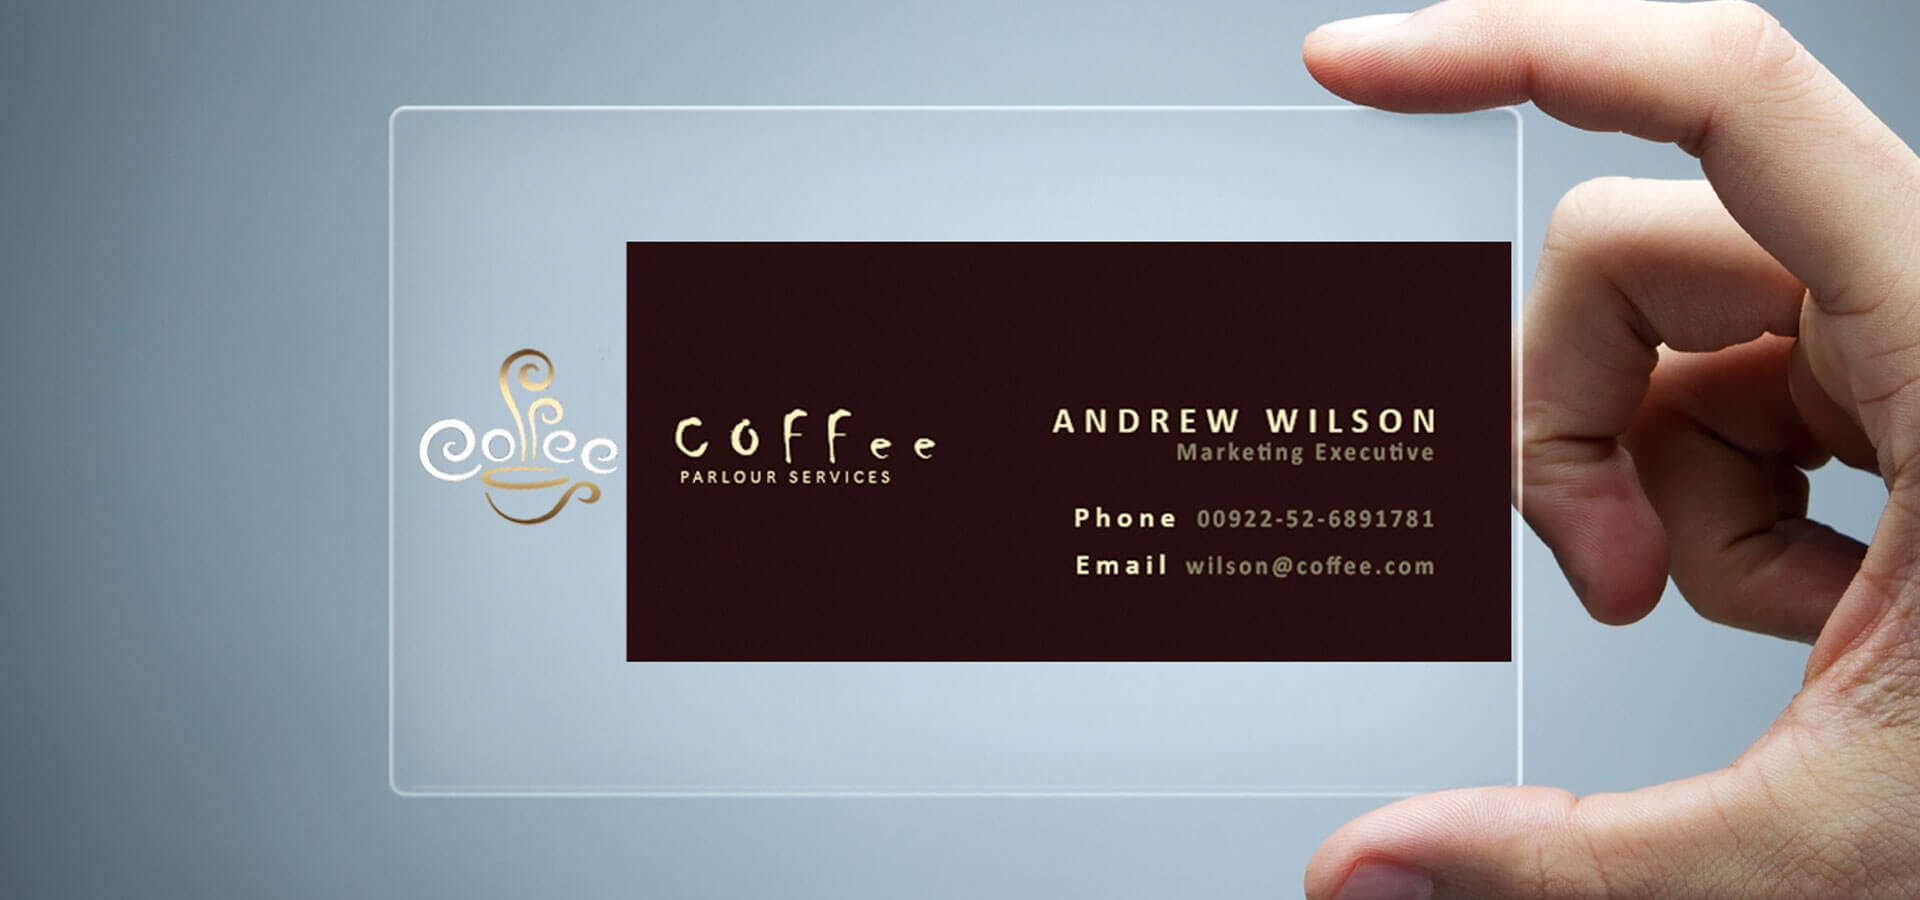 26+ Transparent Business Card Templates - Illustrator, Ms Intended For Microsoft Templates For Business Cards